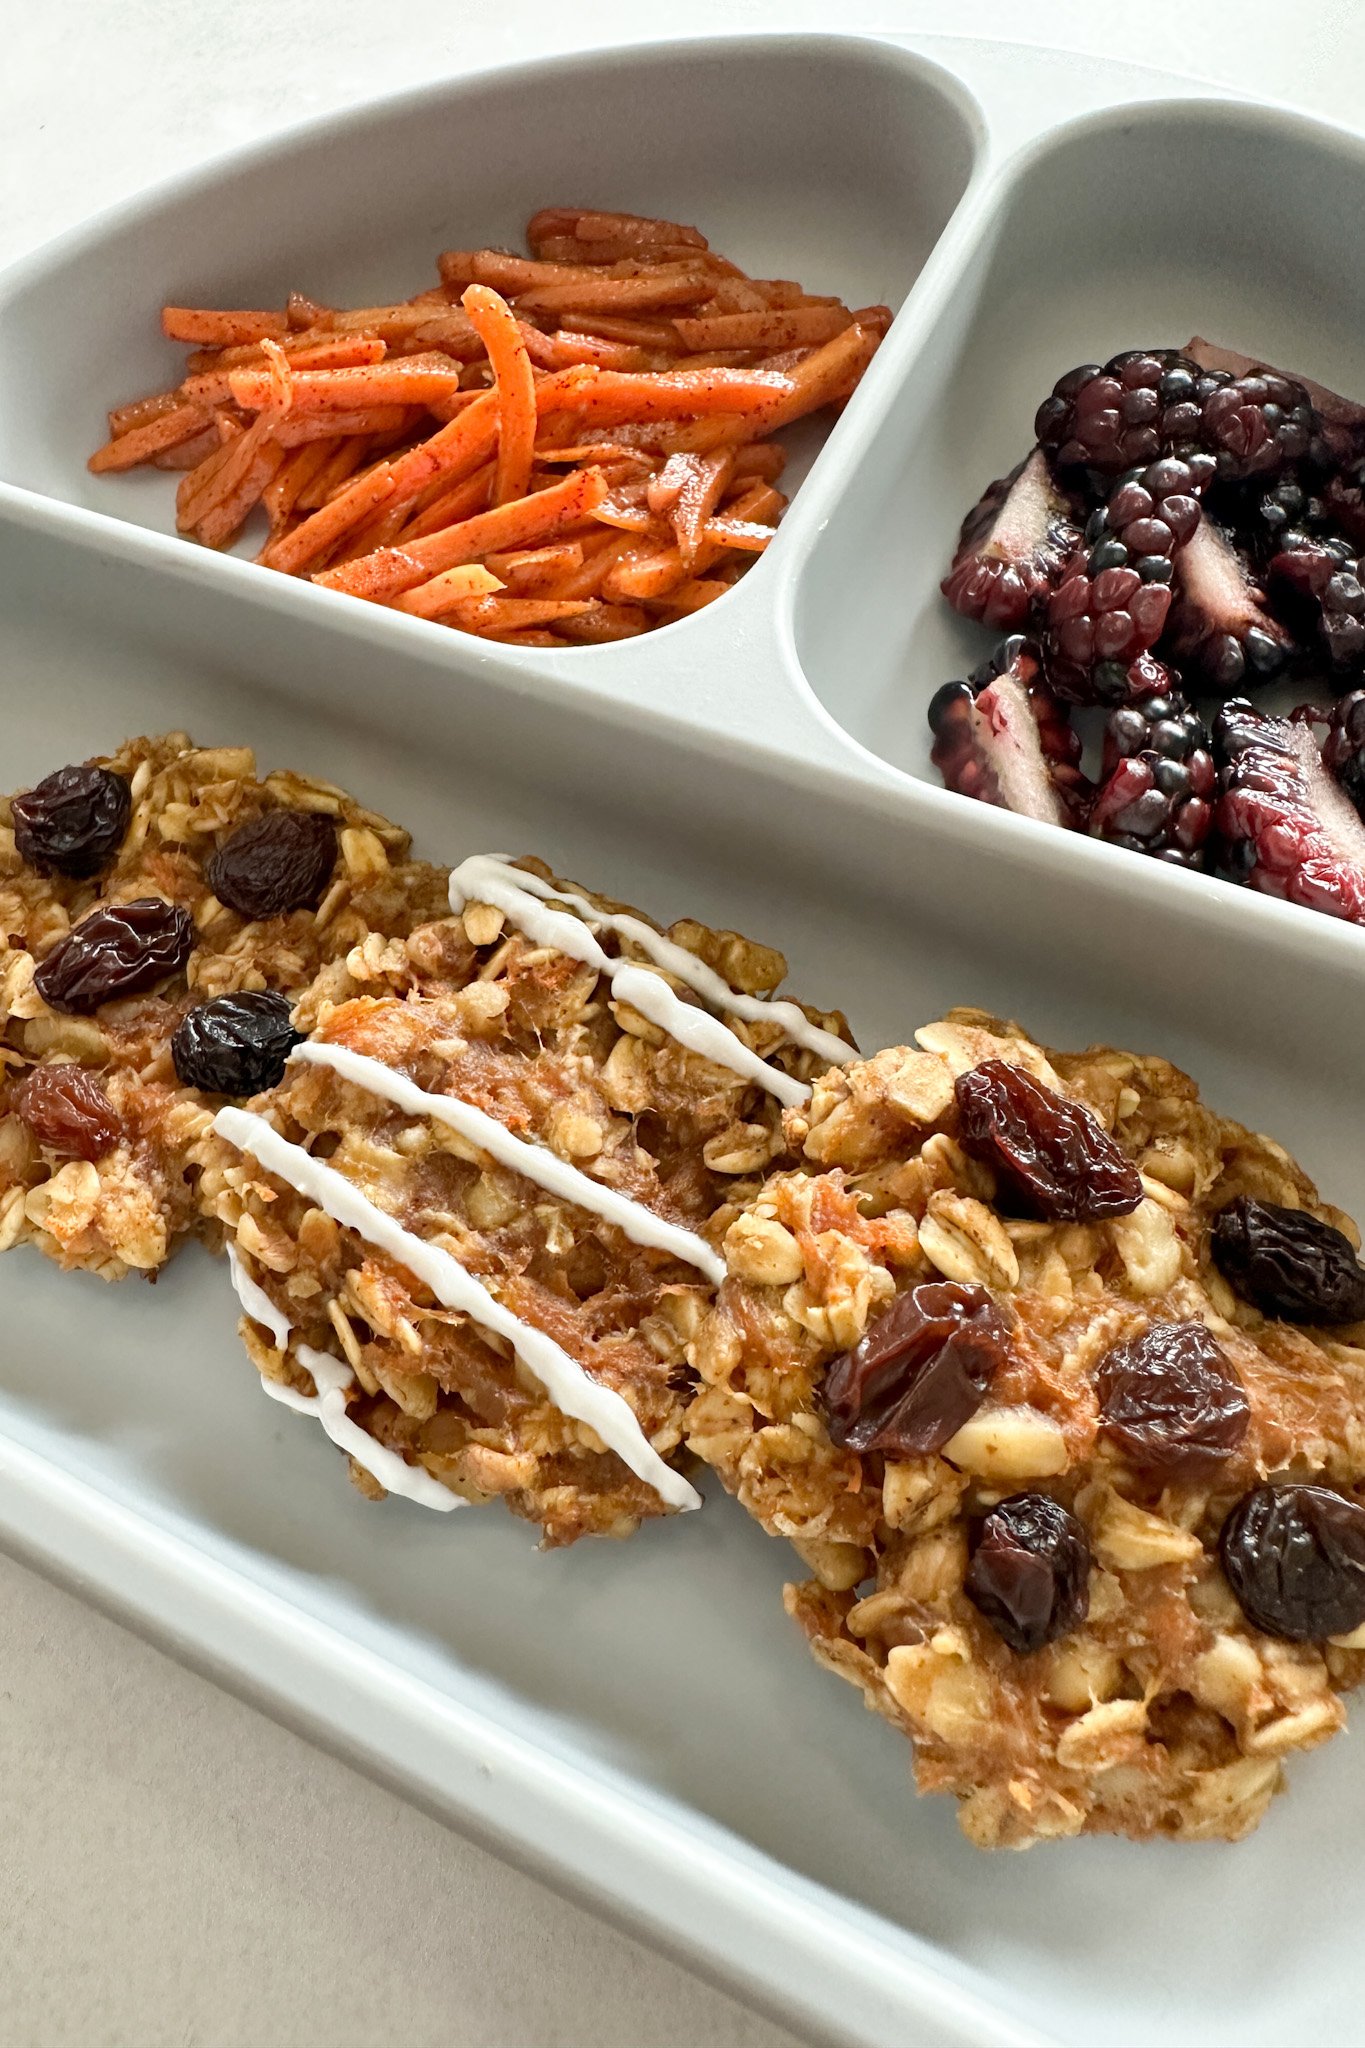 Carrot cake oatmeal cookies served with sauteed cinnamon carrots and blackberries.